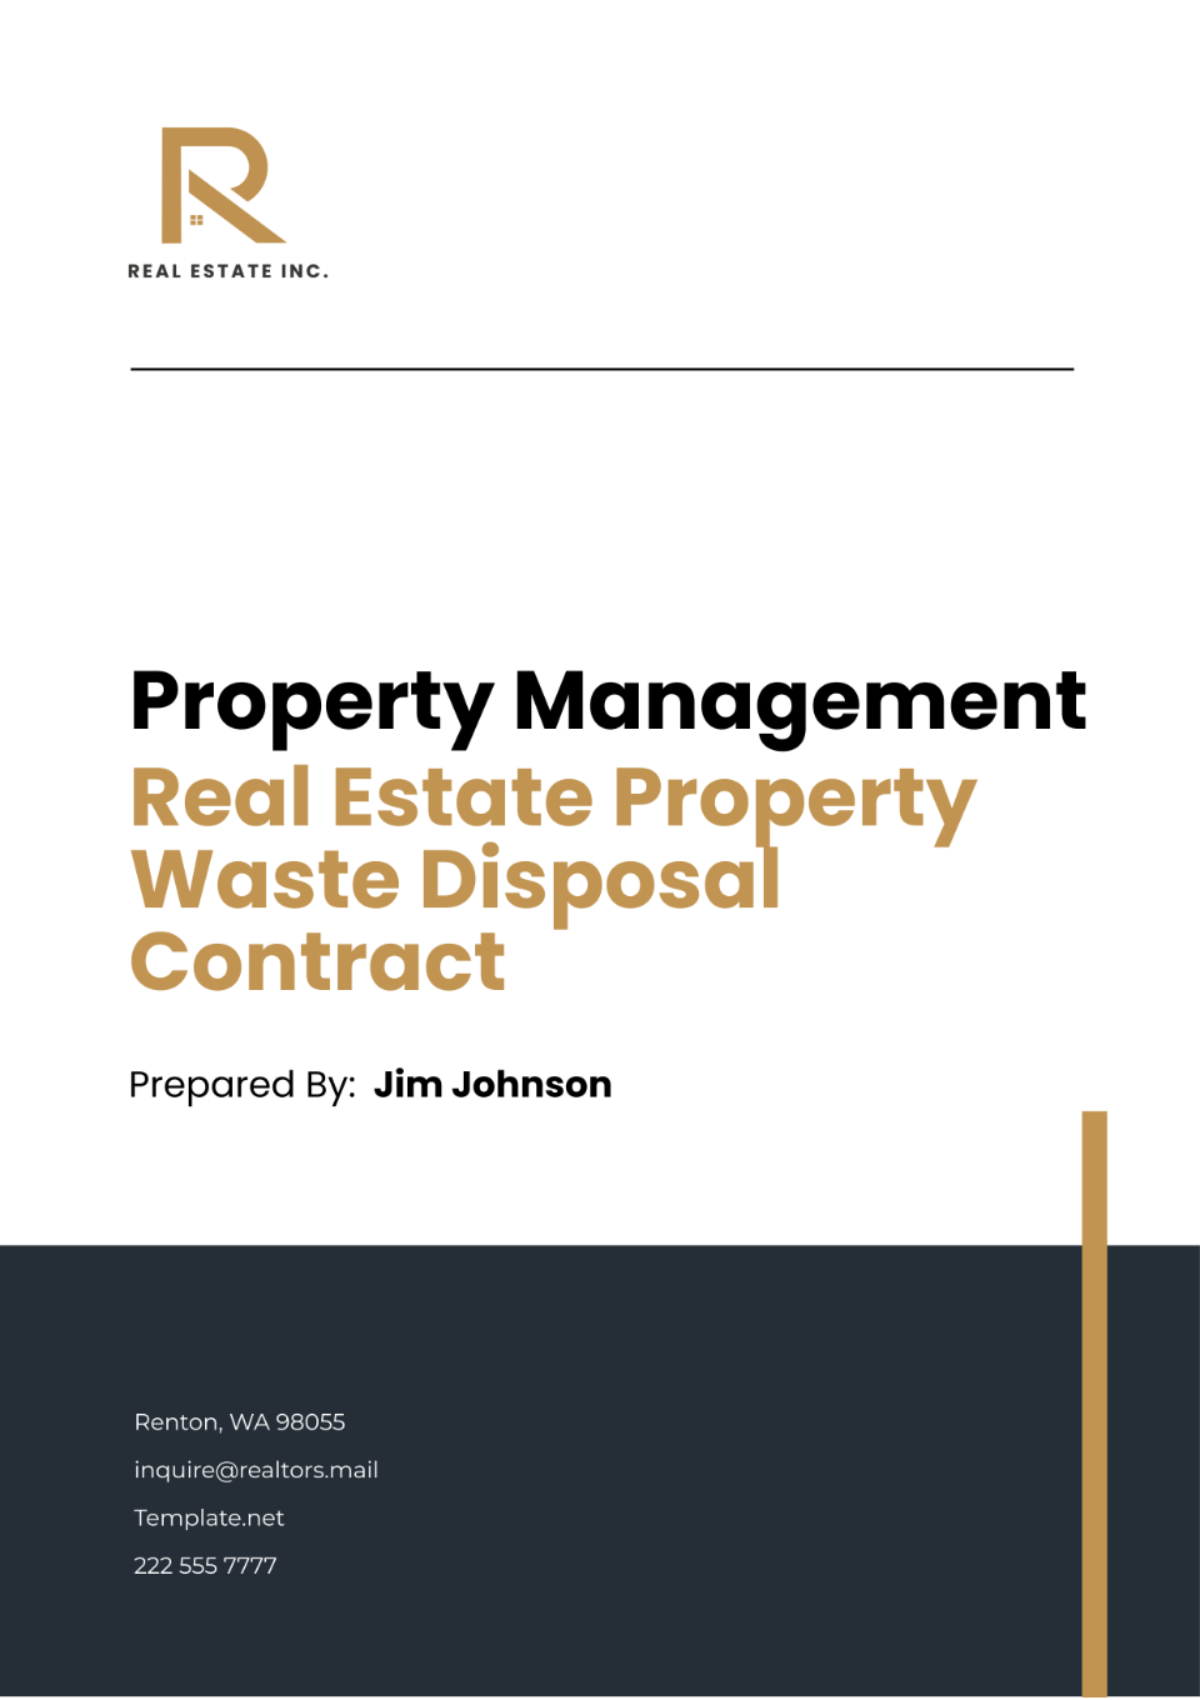 Free Real Estate Property Waste Disposal Contract Template